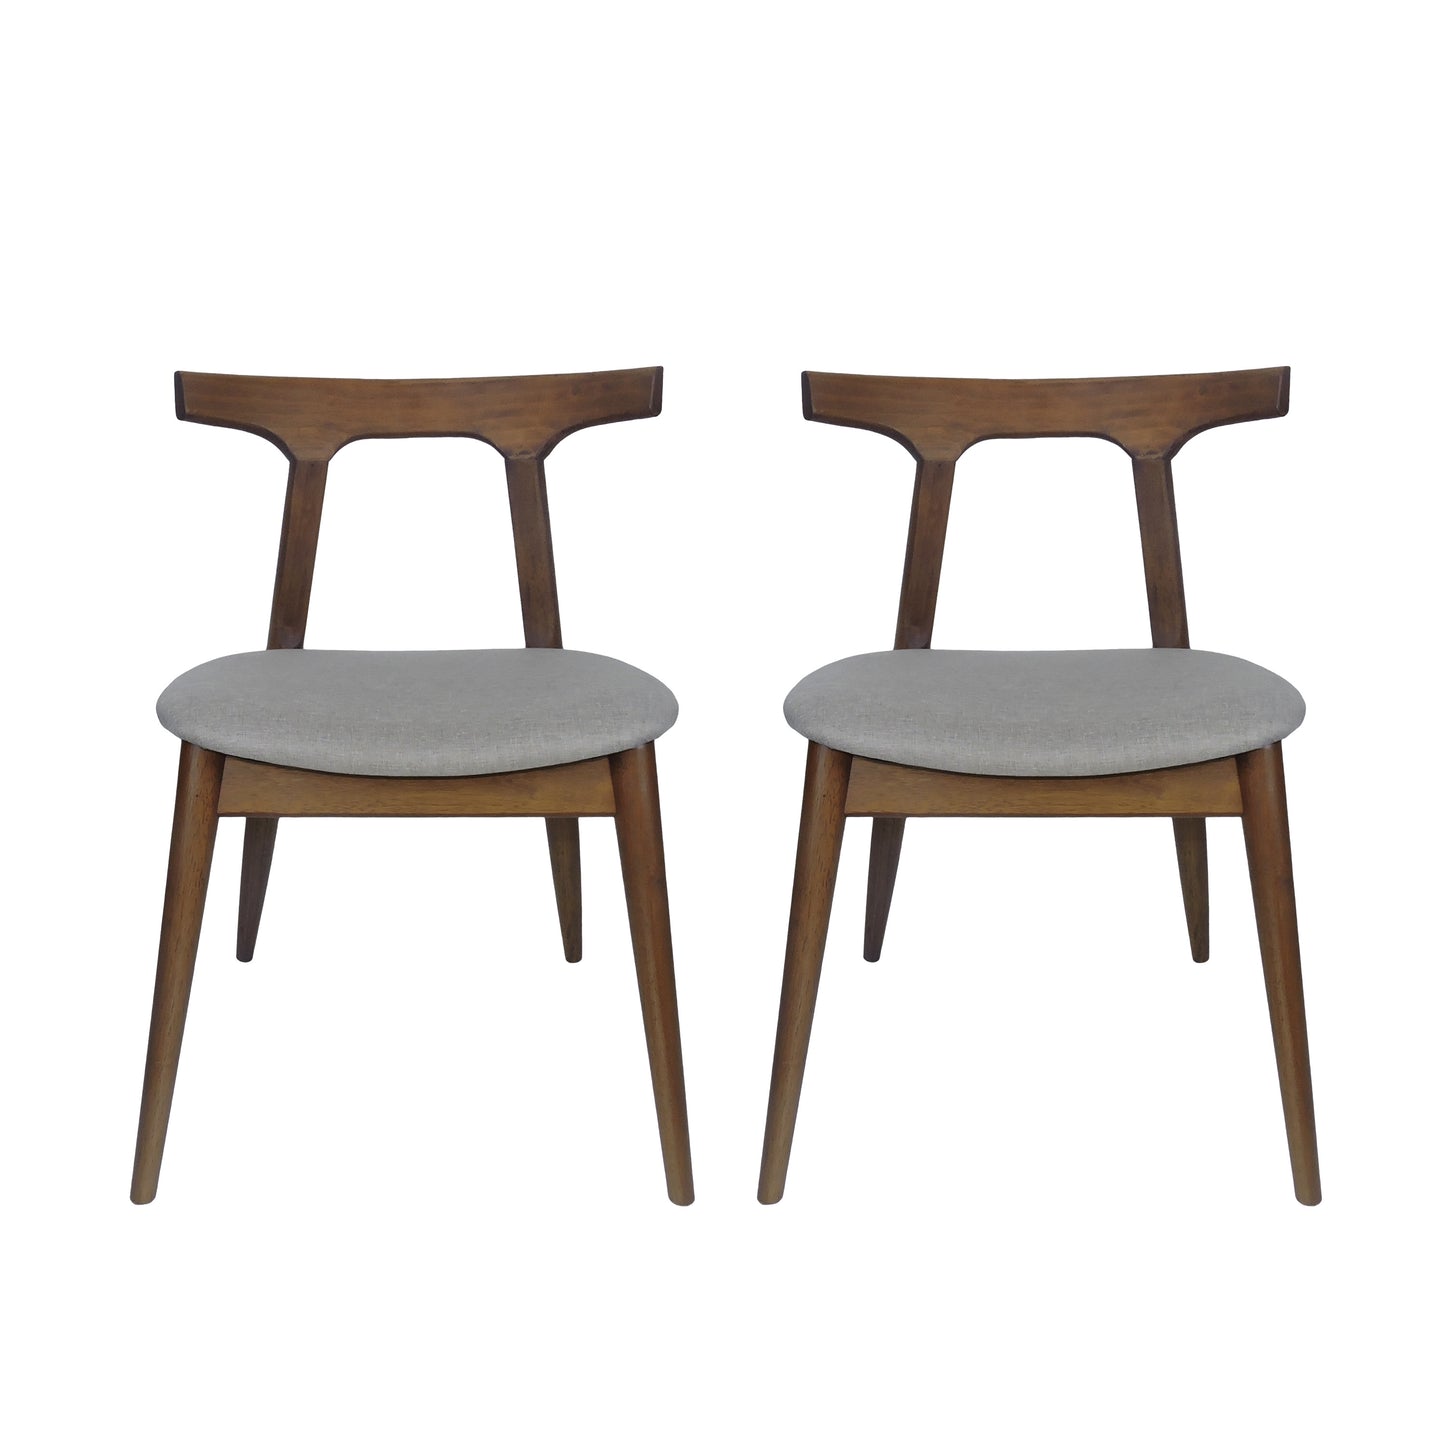 Danmore Mid Century Modern Fabric Upholstered Dining Chairs, Set of 2